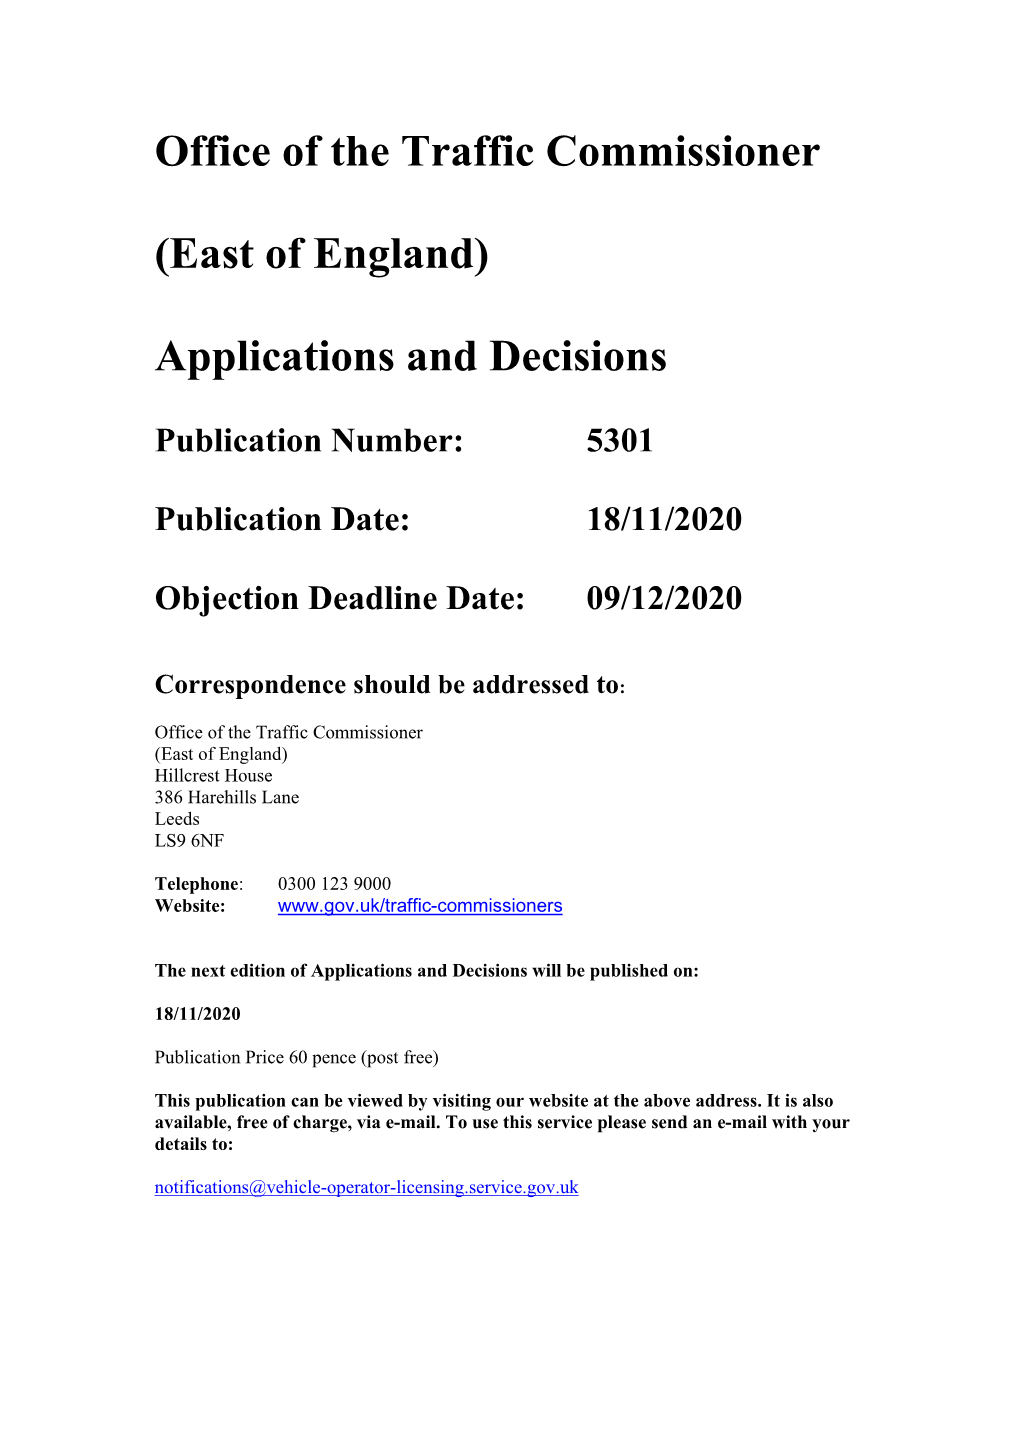 Applications and Decisions for the East of England 5301